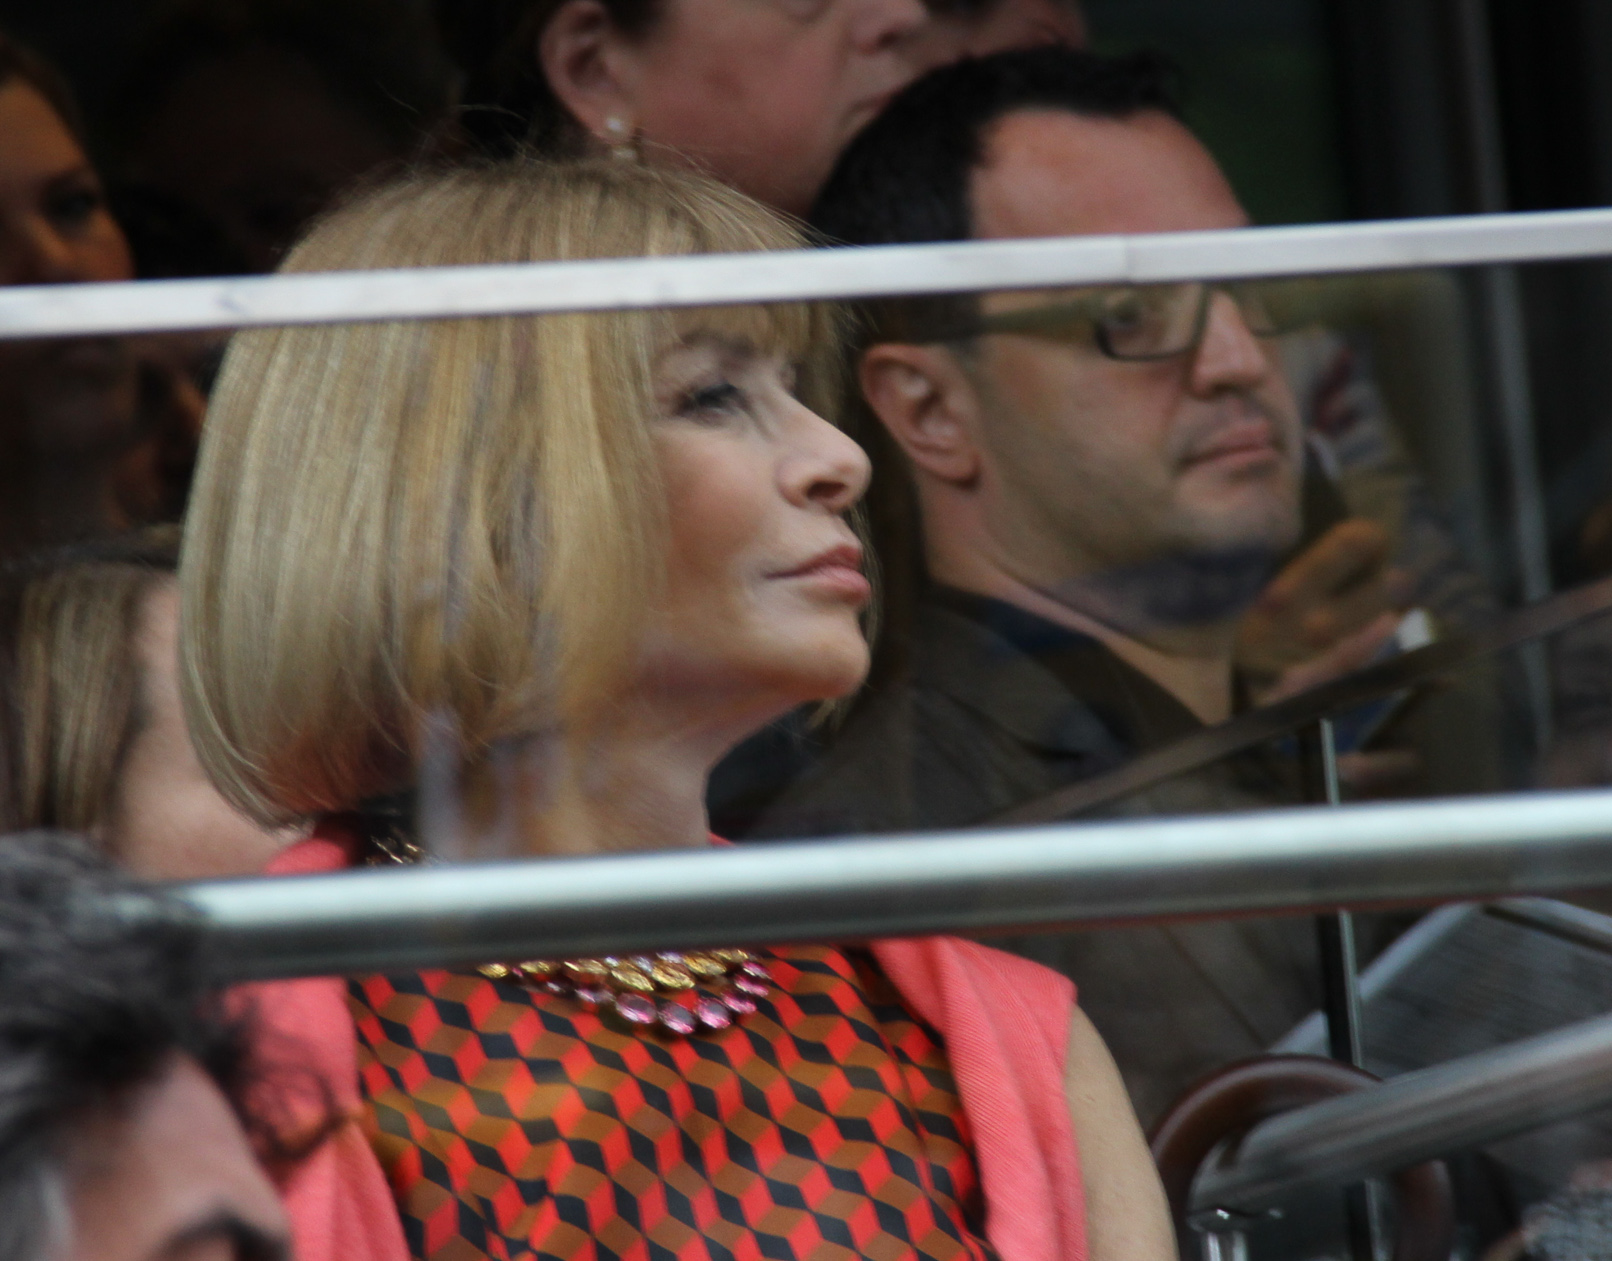 Anna Wintour was on hand at the dedication of the new building, whose volunteer center bears her name.